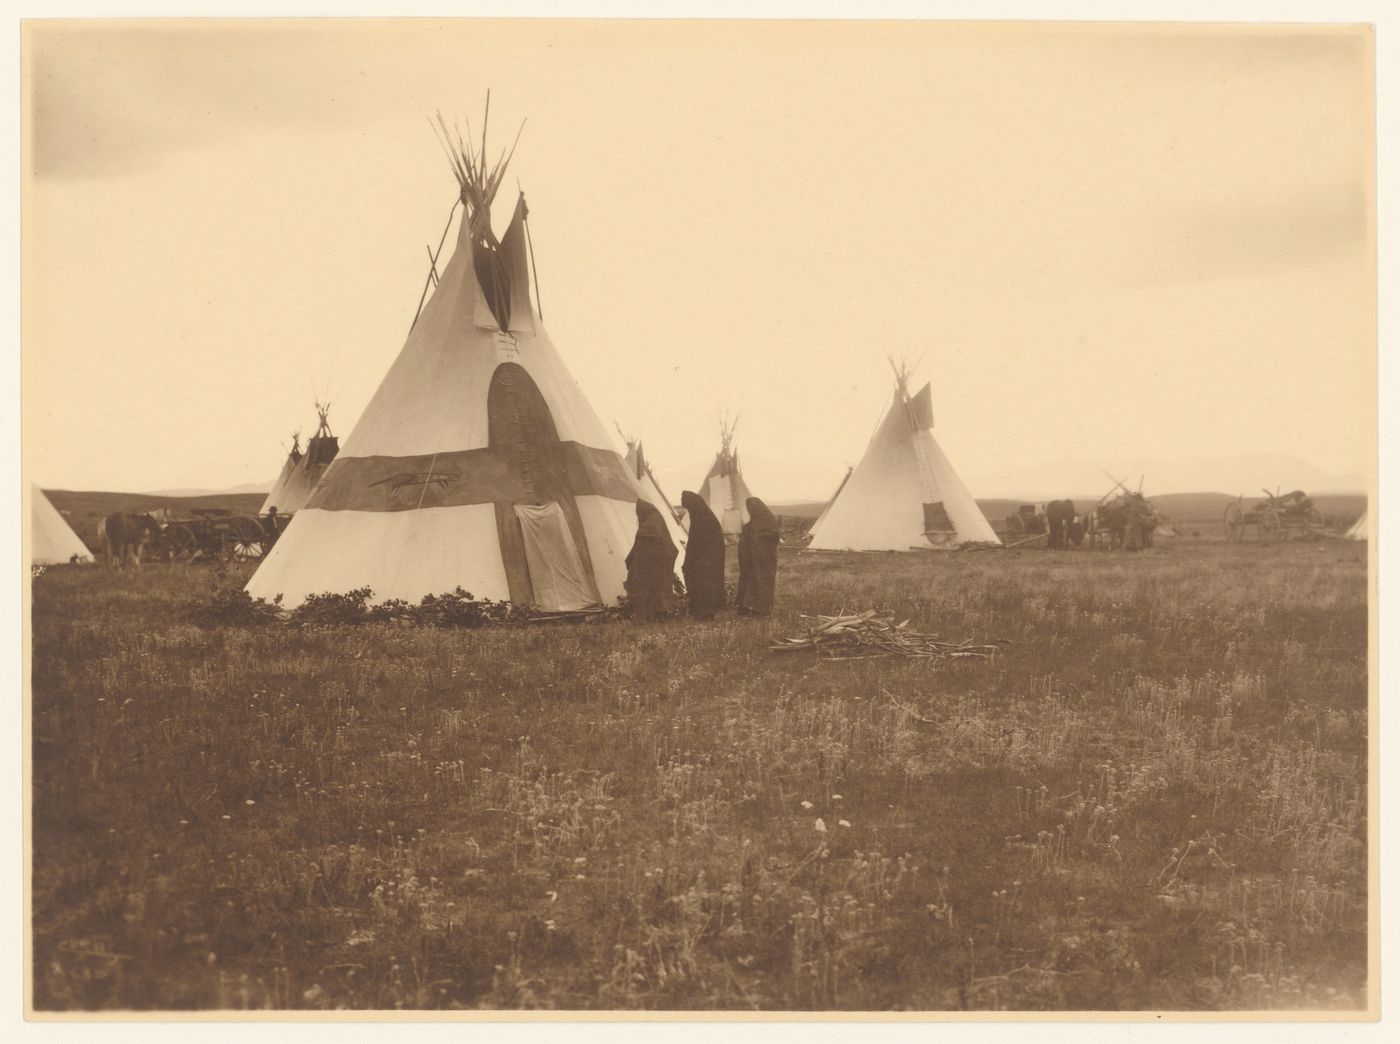 View of three women showing tipis and wagons, United States